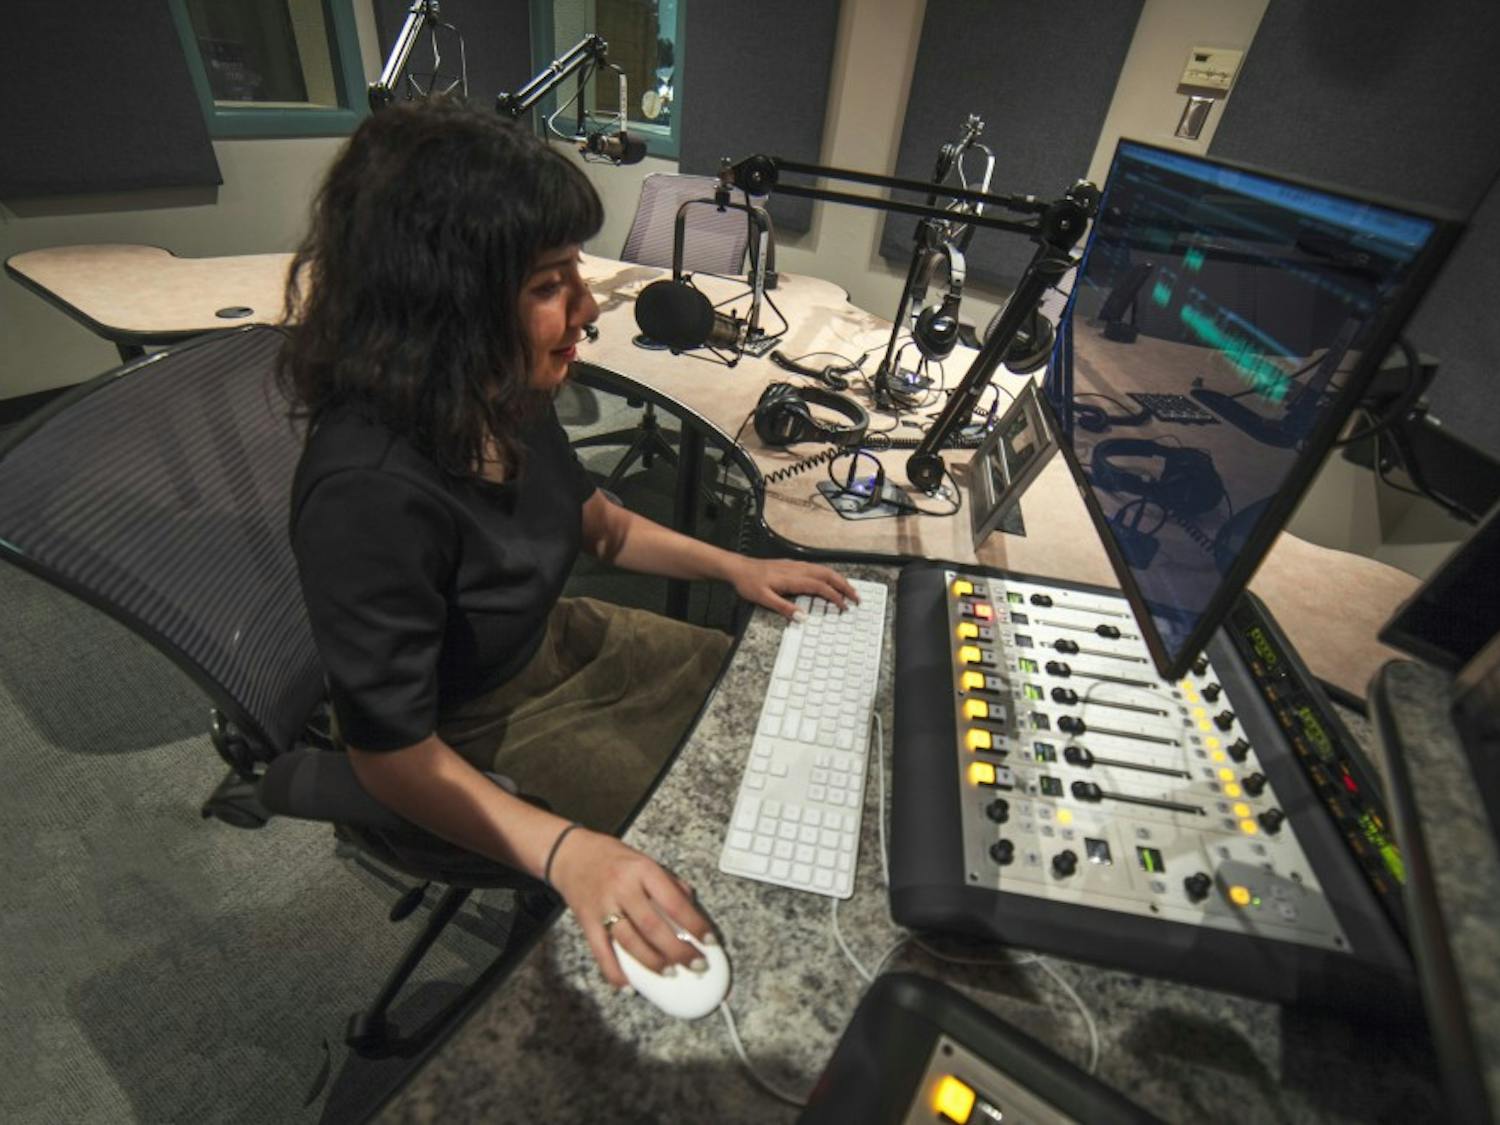 Christina Rodriguez, a Generation Justice fellow &mdash; KUNM's community journalism media project &mdash; edits audio in a KUNM studio. Rodriguez says that public broadcasting is one of the only ways that communities can have agency over their own stories.